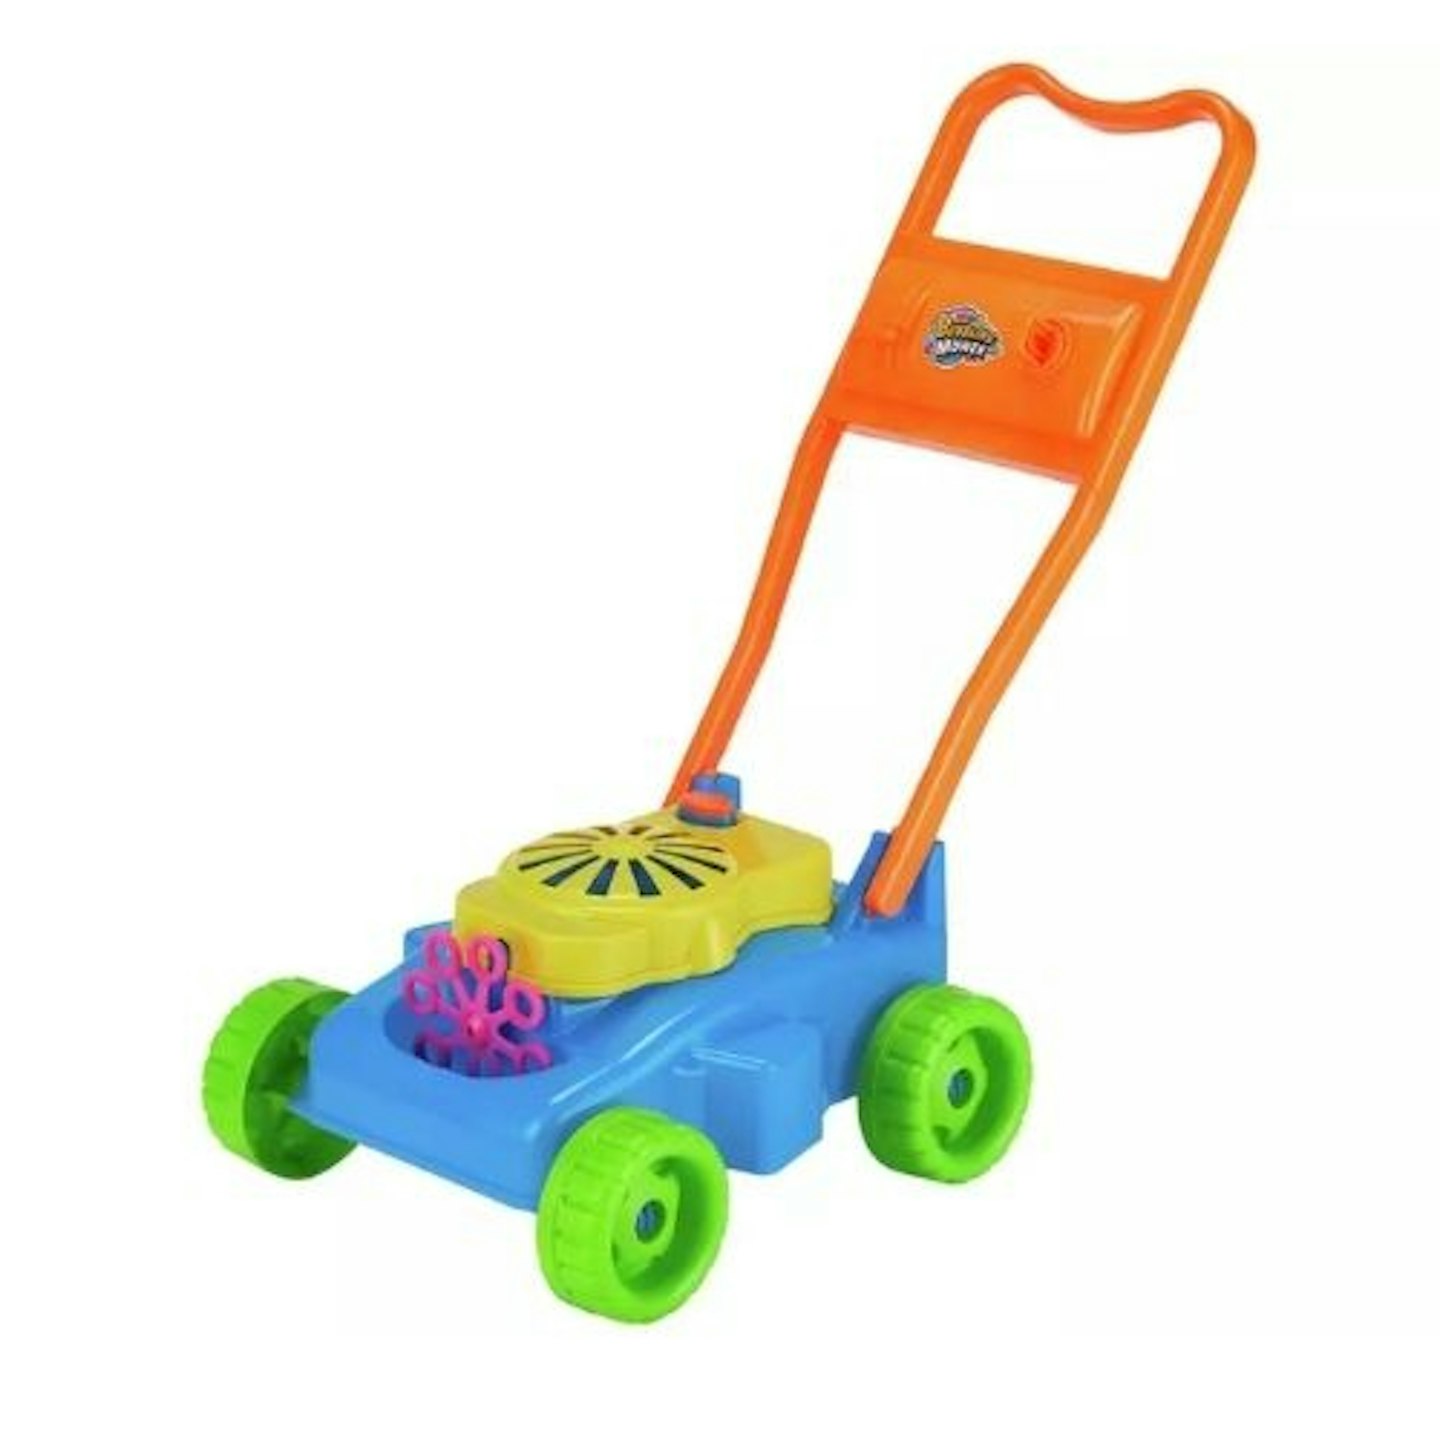 Chad Valley Bubble Lawn Mower